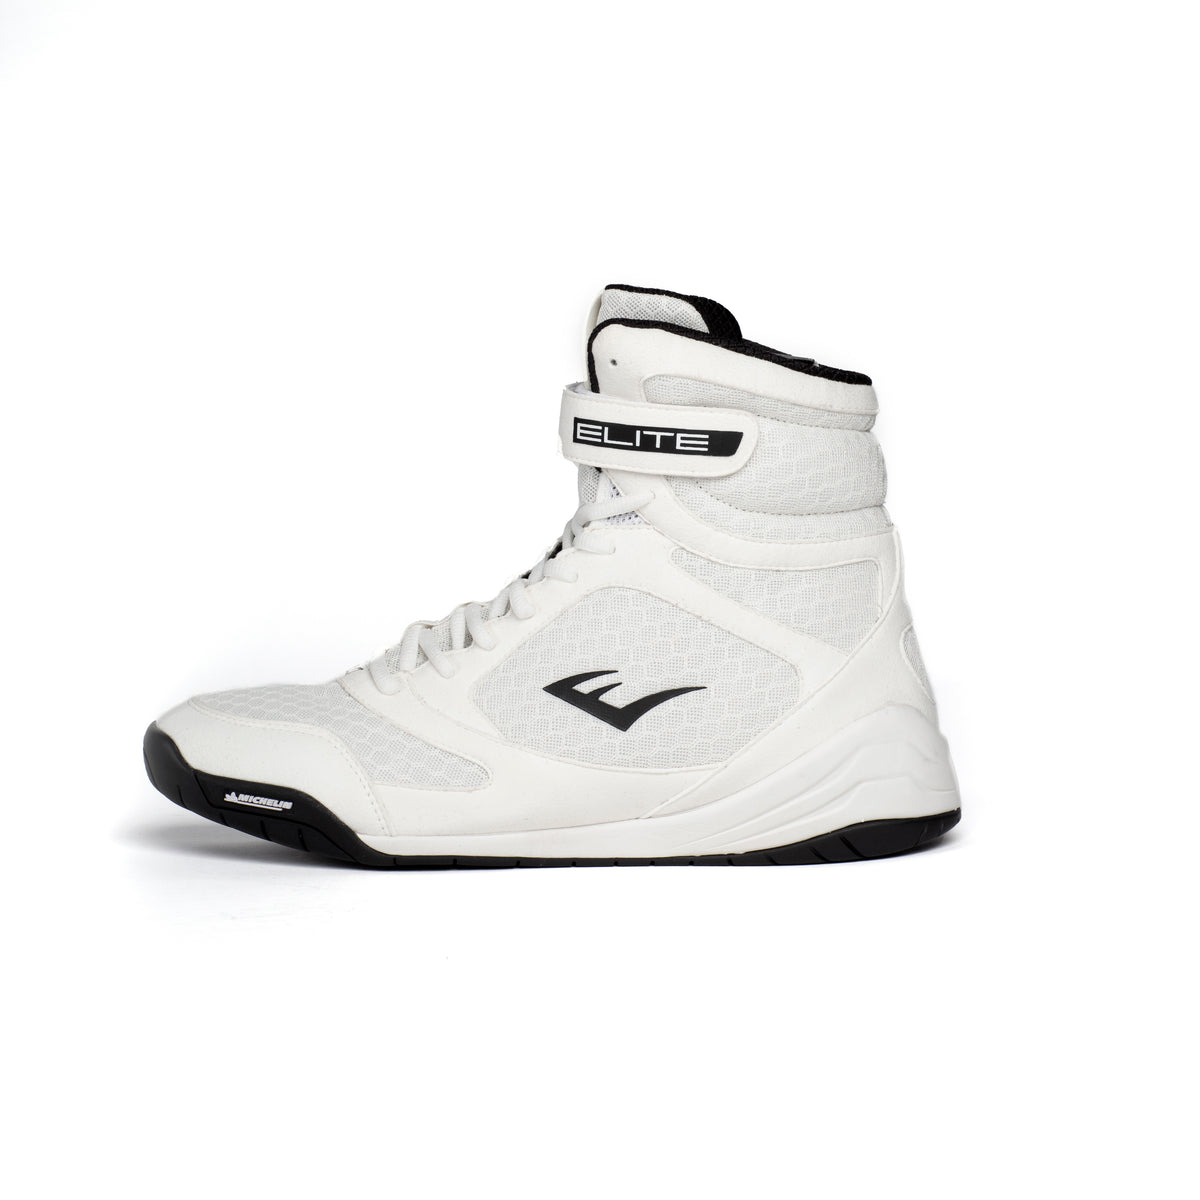 Everlast Elite 2.0 High Top Boxing Shoes WHITE – FIGHT 2 FINISH